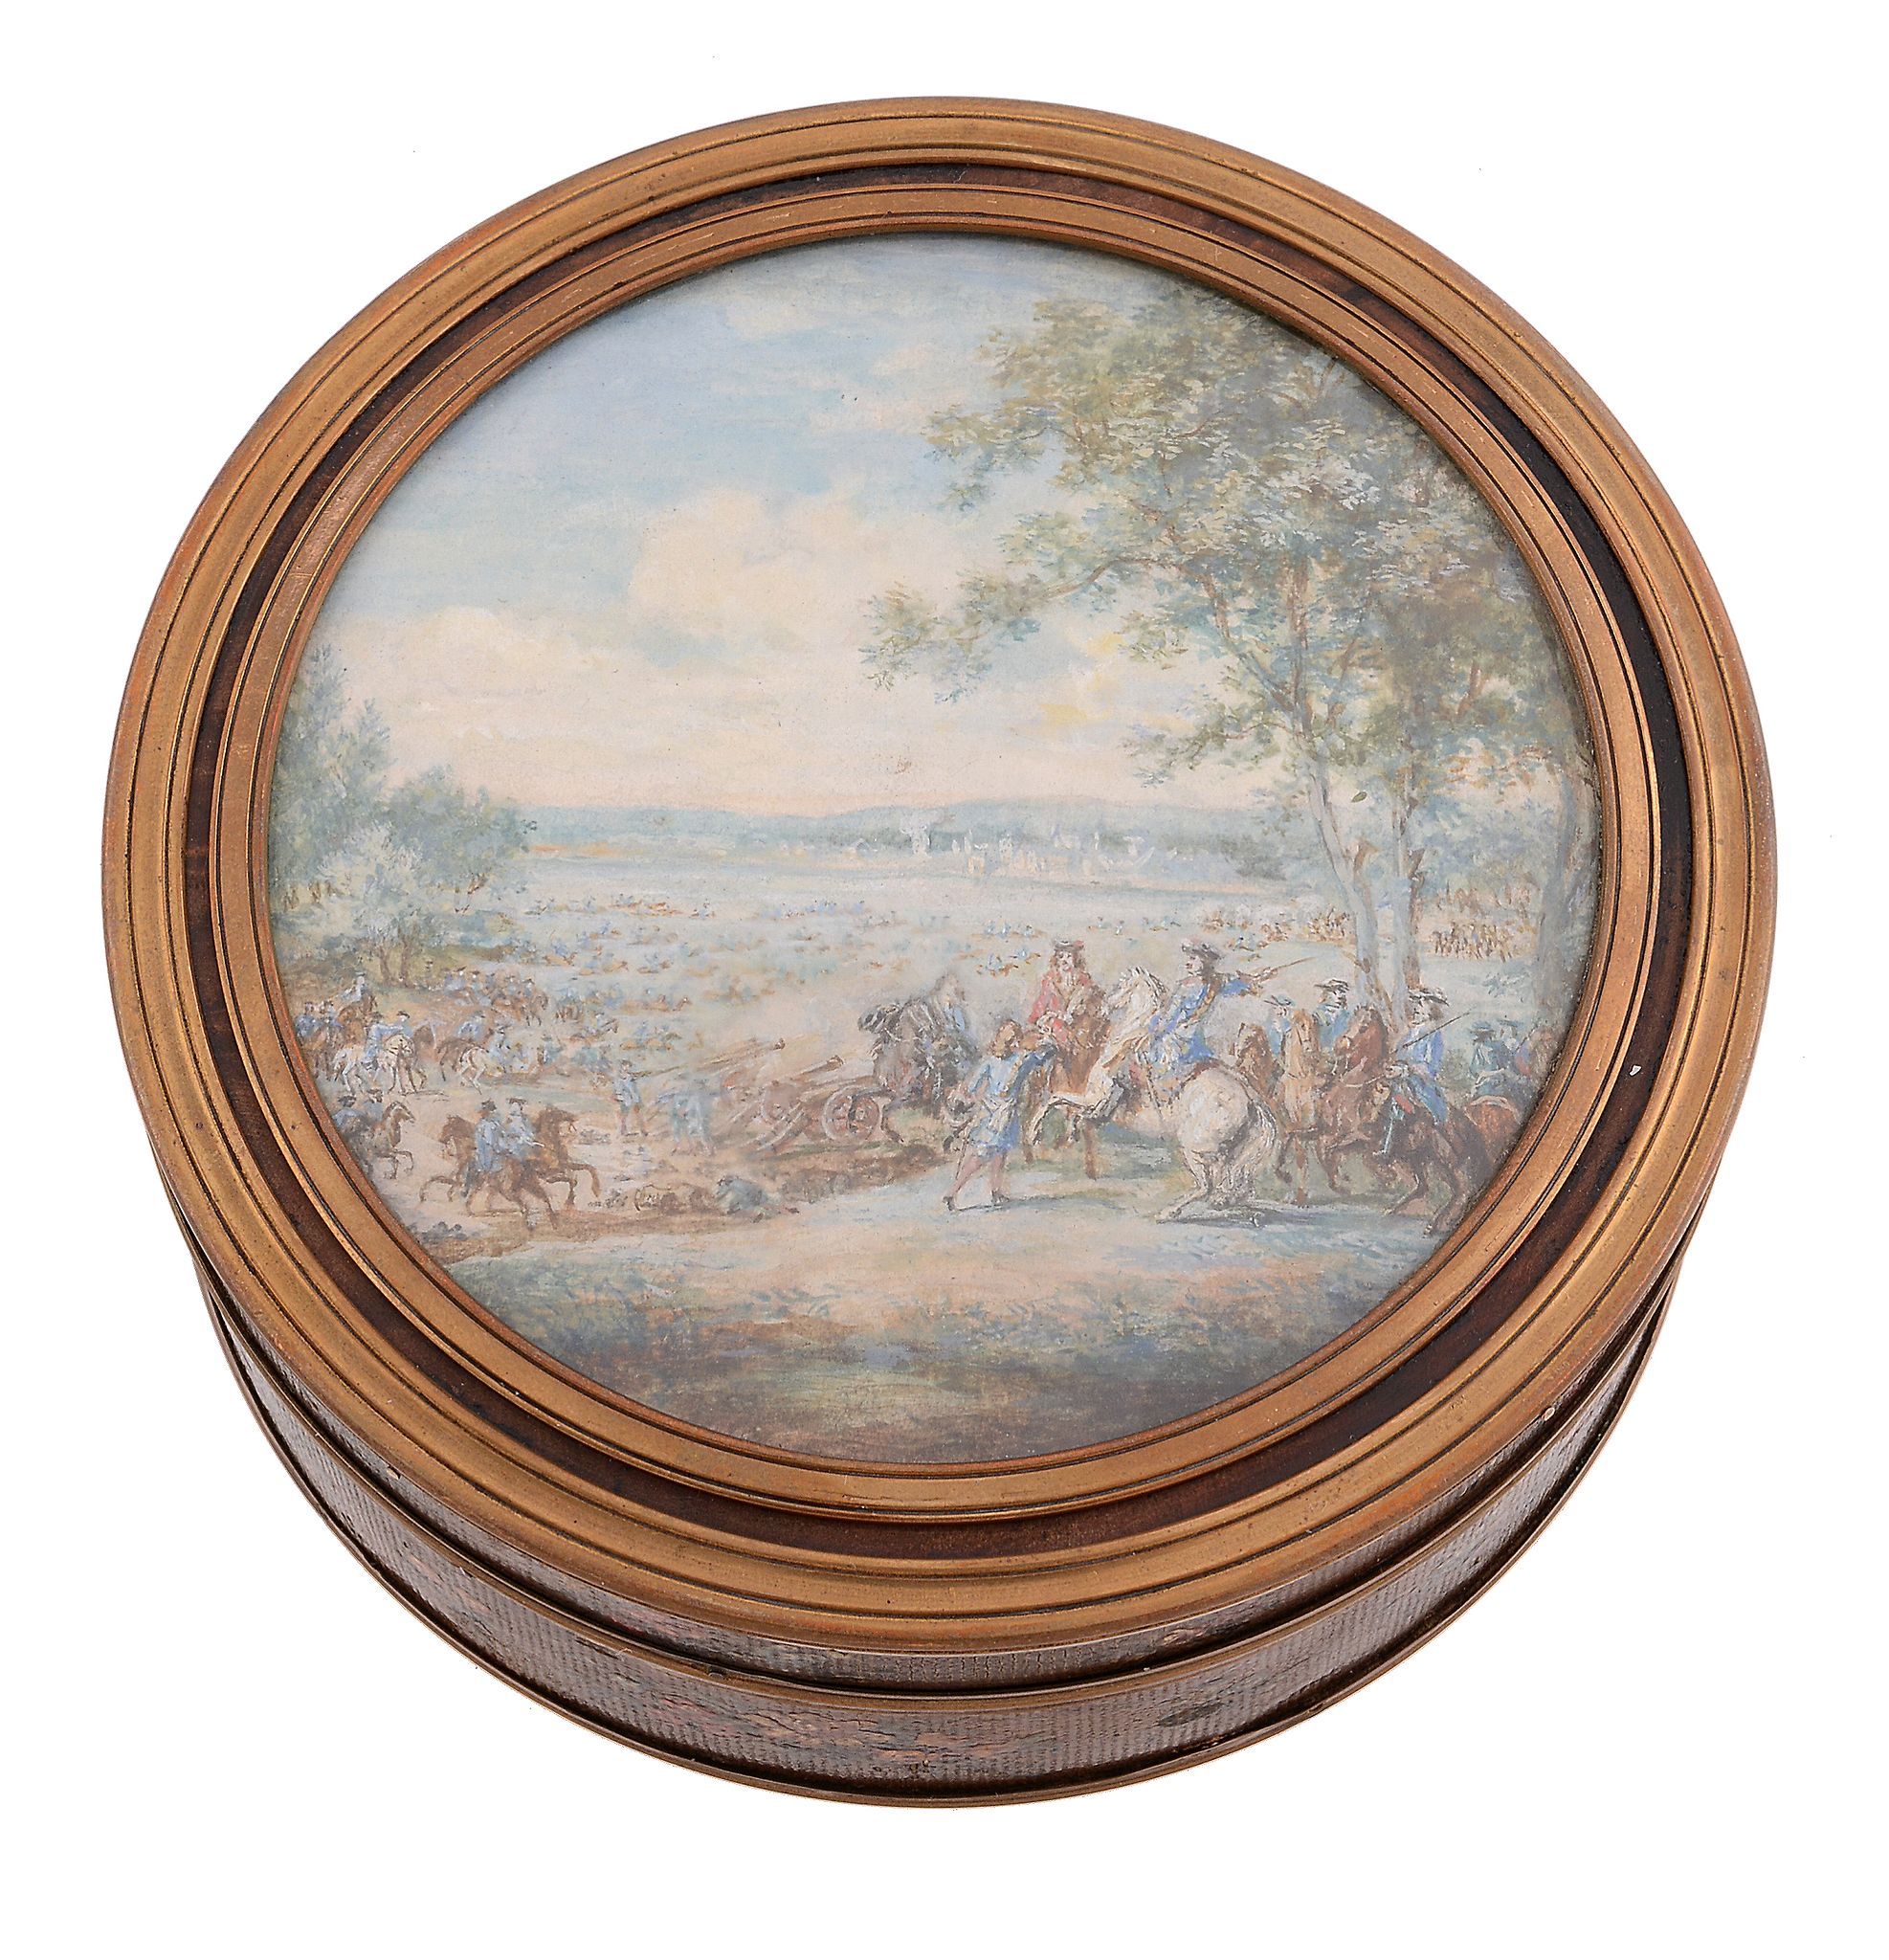 A French lacquer and watercolour bonbonniere, early 19th century A French lacquer and watercolour